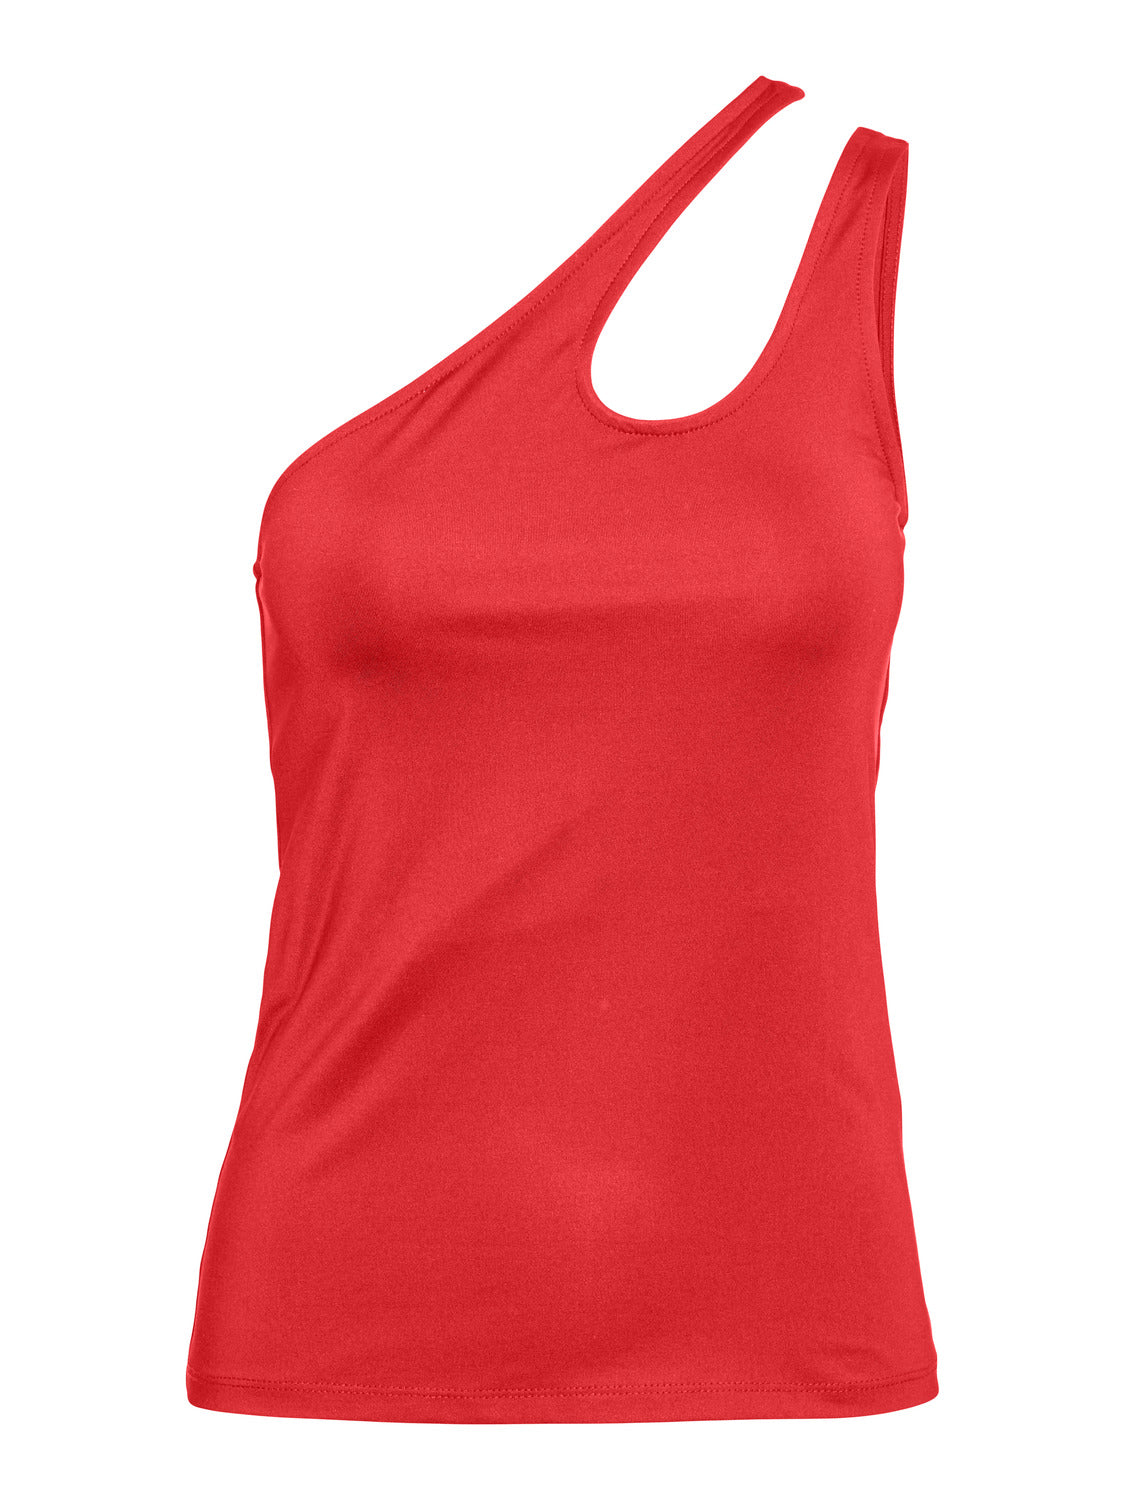 VMBIANCA T-Shirts & Tops - Poppy Red